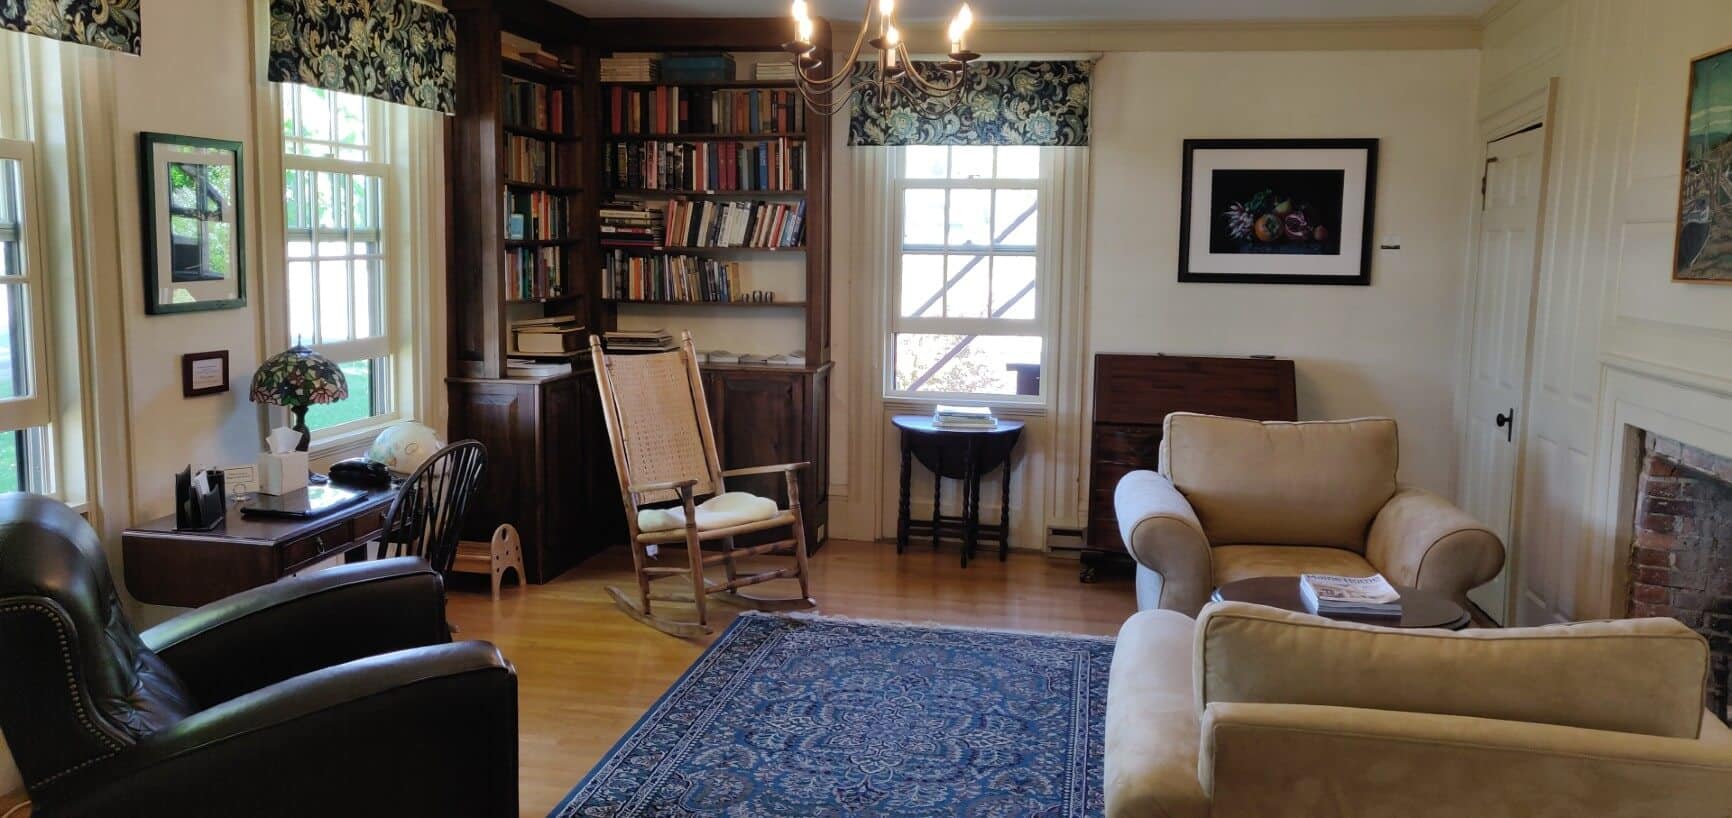 View of room with large bookshelves, lots of chairs, and windows